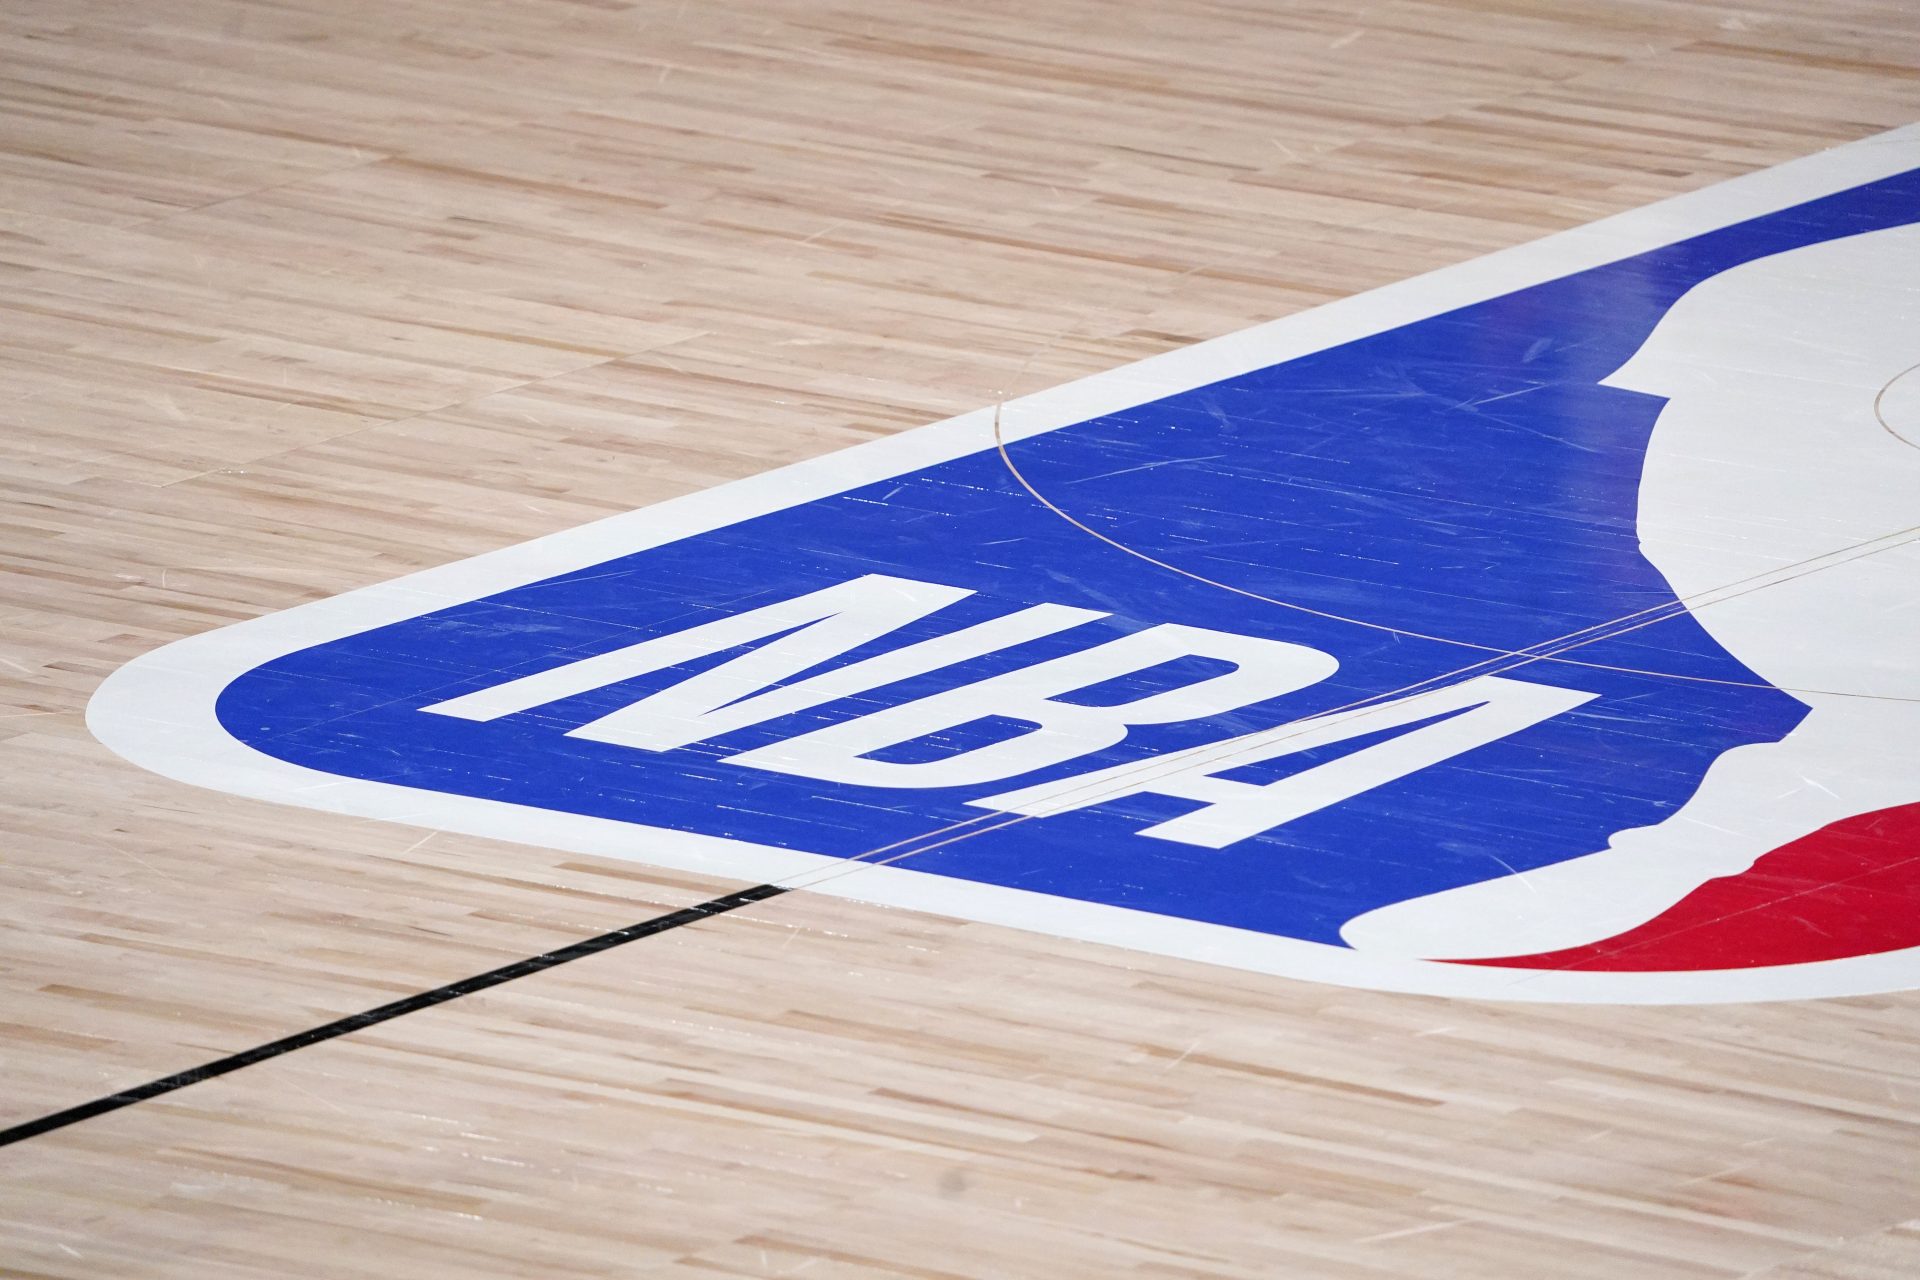 NBA Agenda 2022: Traditional Season, Playoffs, Finals and Key Dates Reportedly Revealed